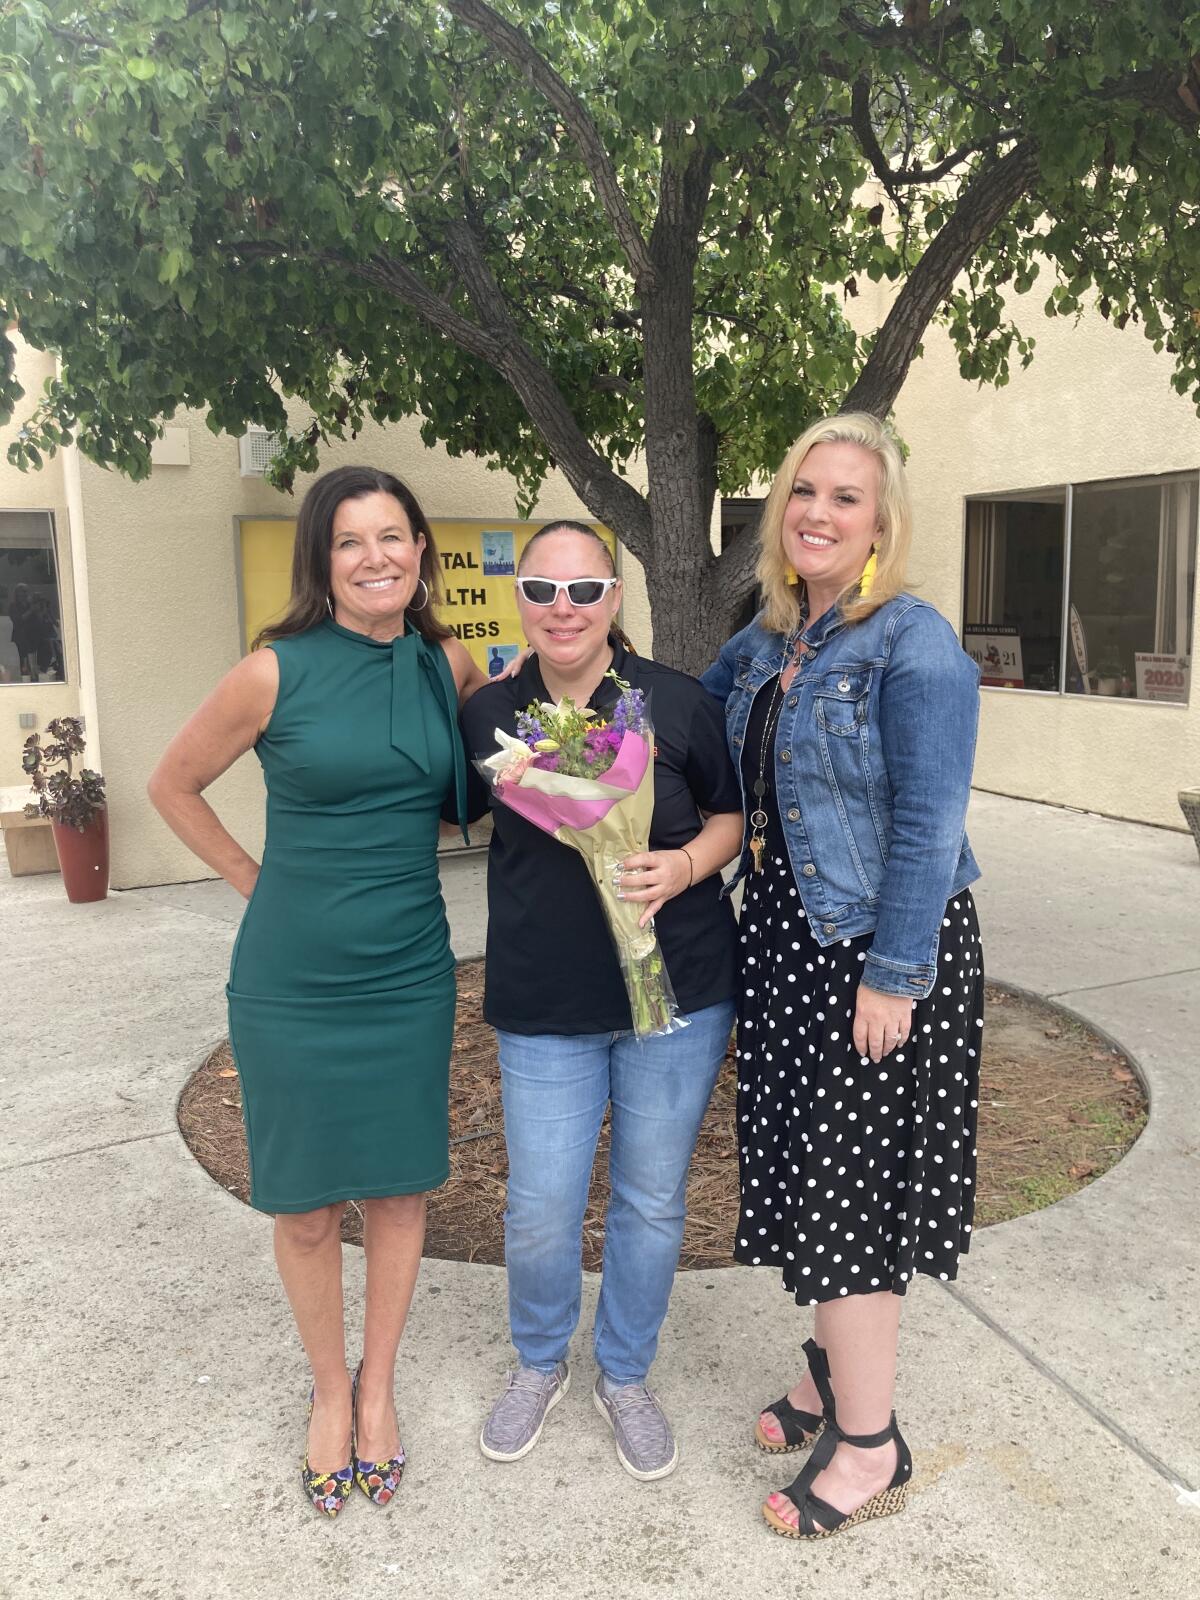 La Jolla High School Teacher of the Year Cantrell Hatch (center) with Merino and LJHS Vice Principal Cindy Ueckert June 2.